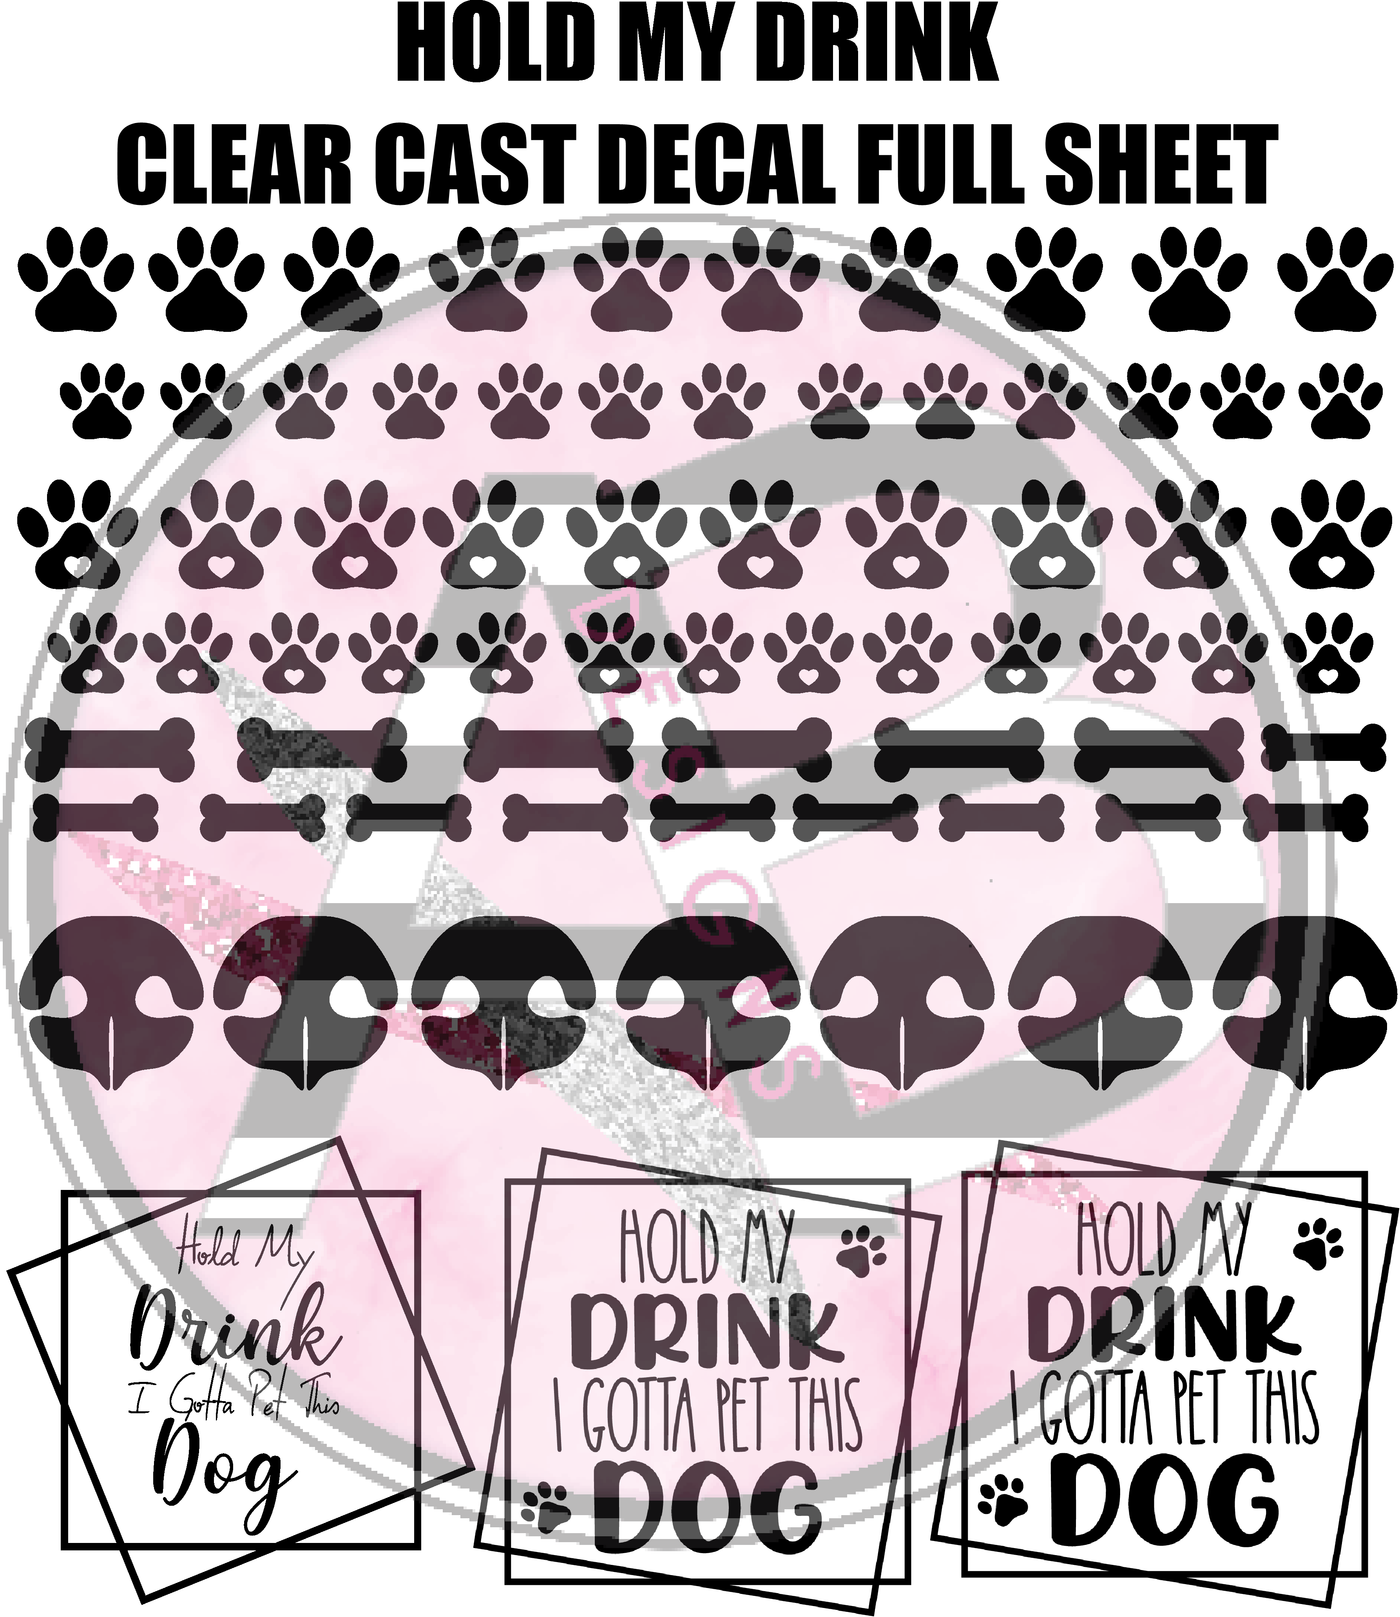 Hold My Drink Full Sheet 12x12 Clear Cast Decal